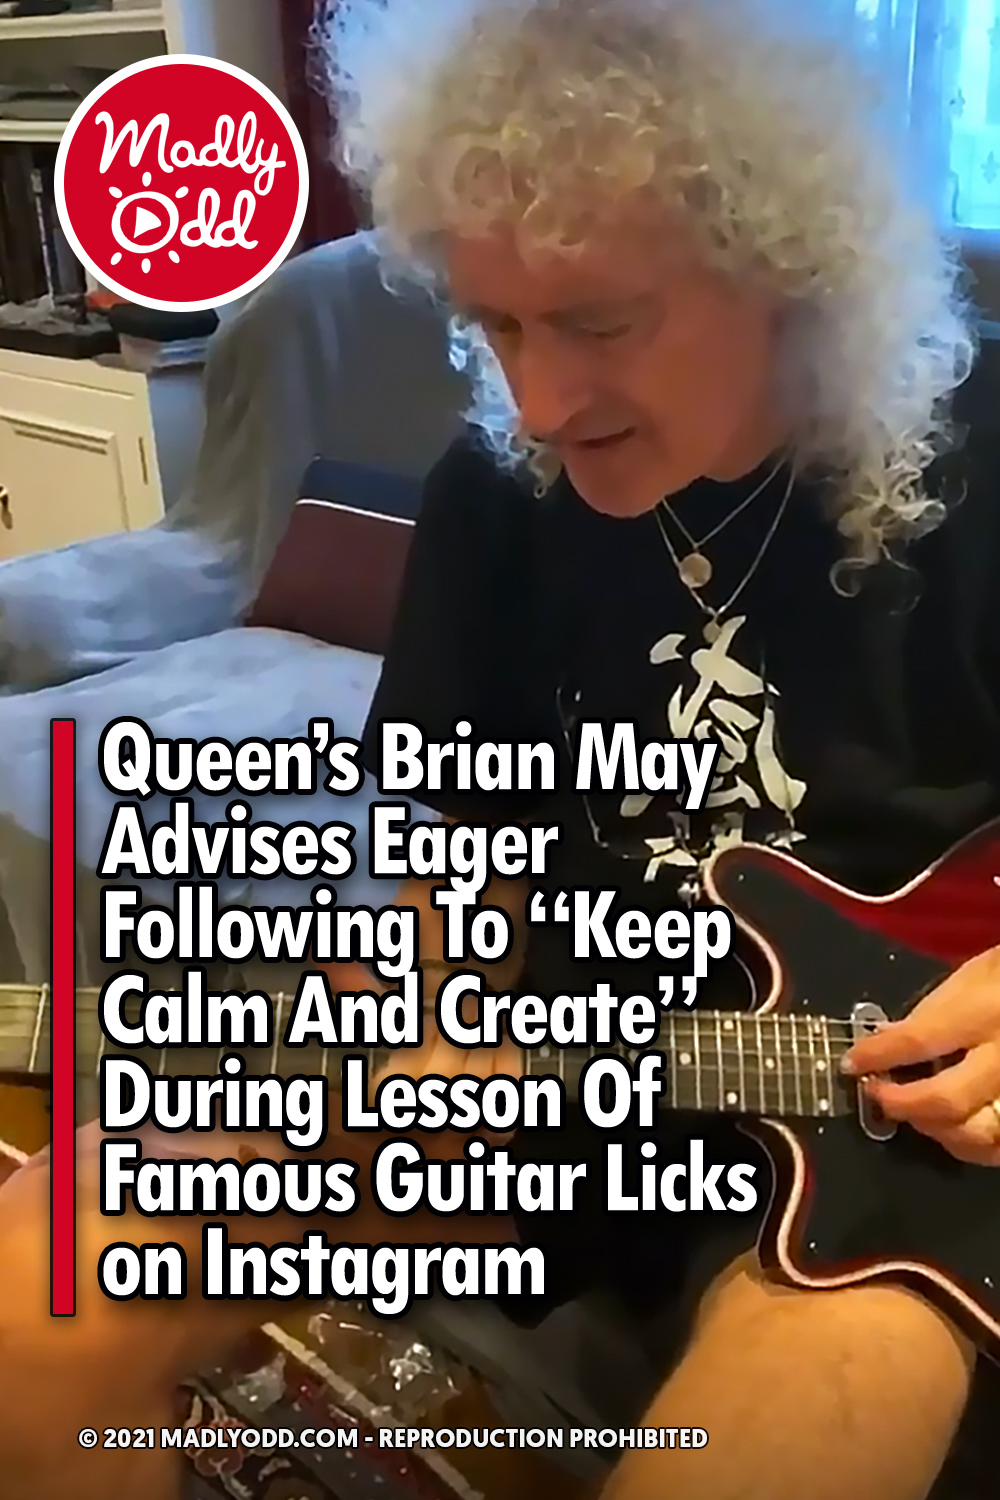 Queen\'s Brian May Advises Eager Following To “Keep Calm And Create” During Lesson Of Famous Guitar Licks on Instagram